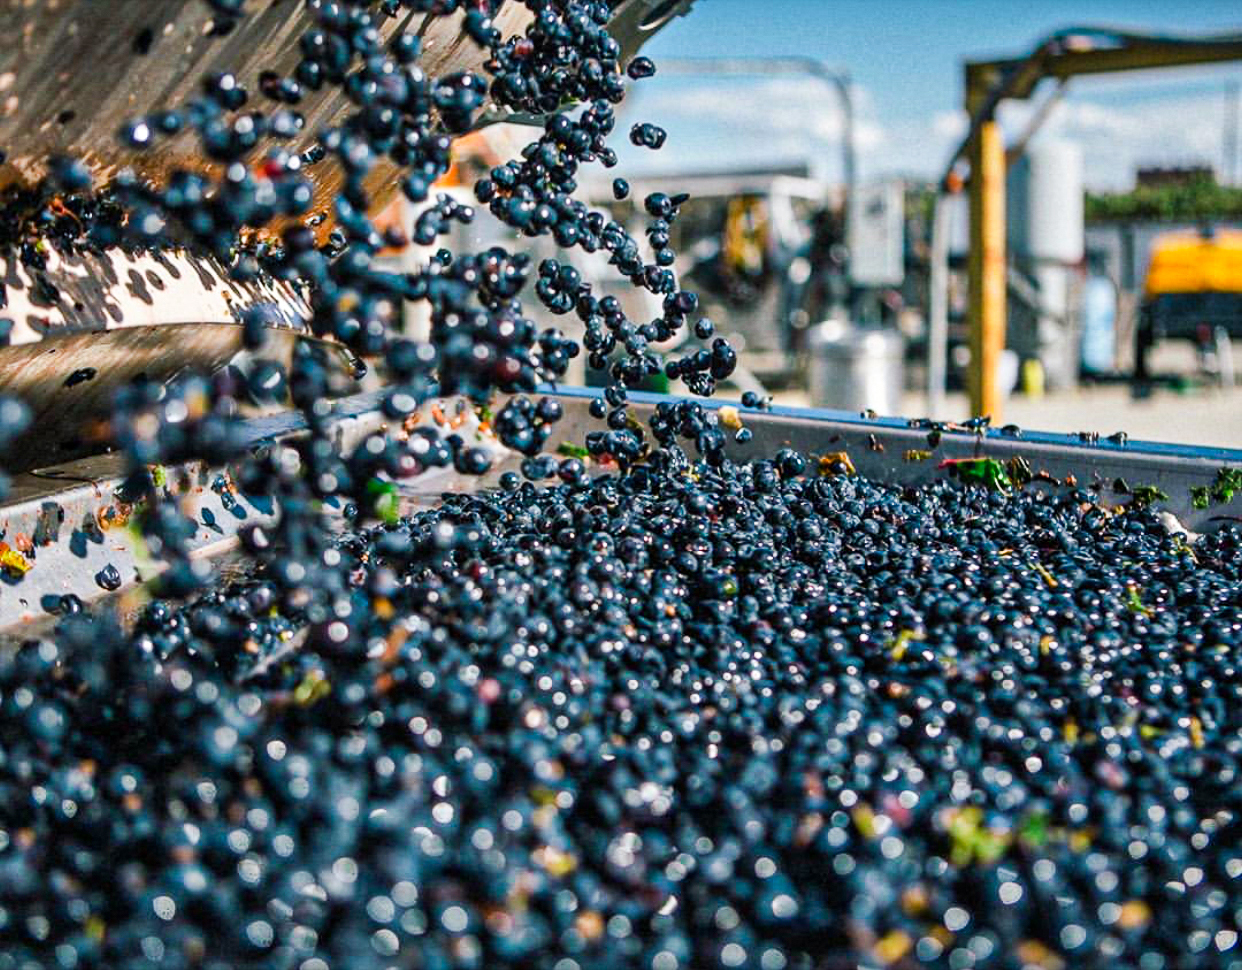 Dark purple-blue grapes fall into a metal container full of grapes. Machinery and blue sky is out of focus in the background.